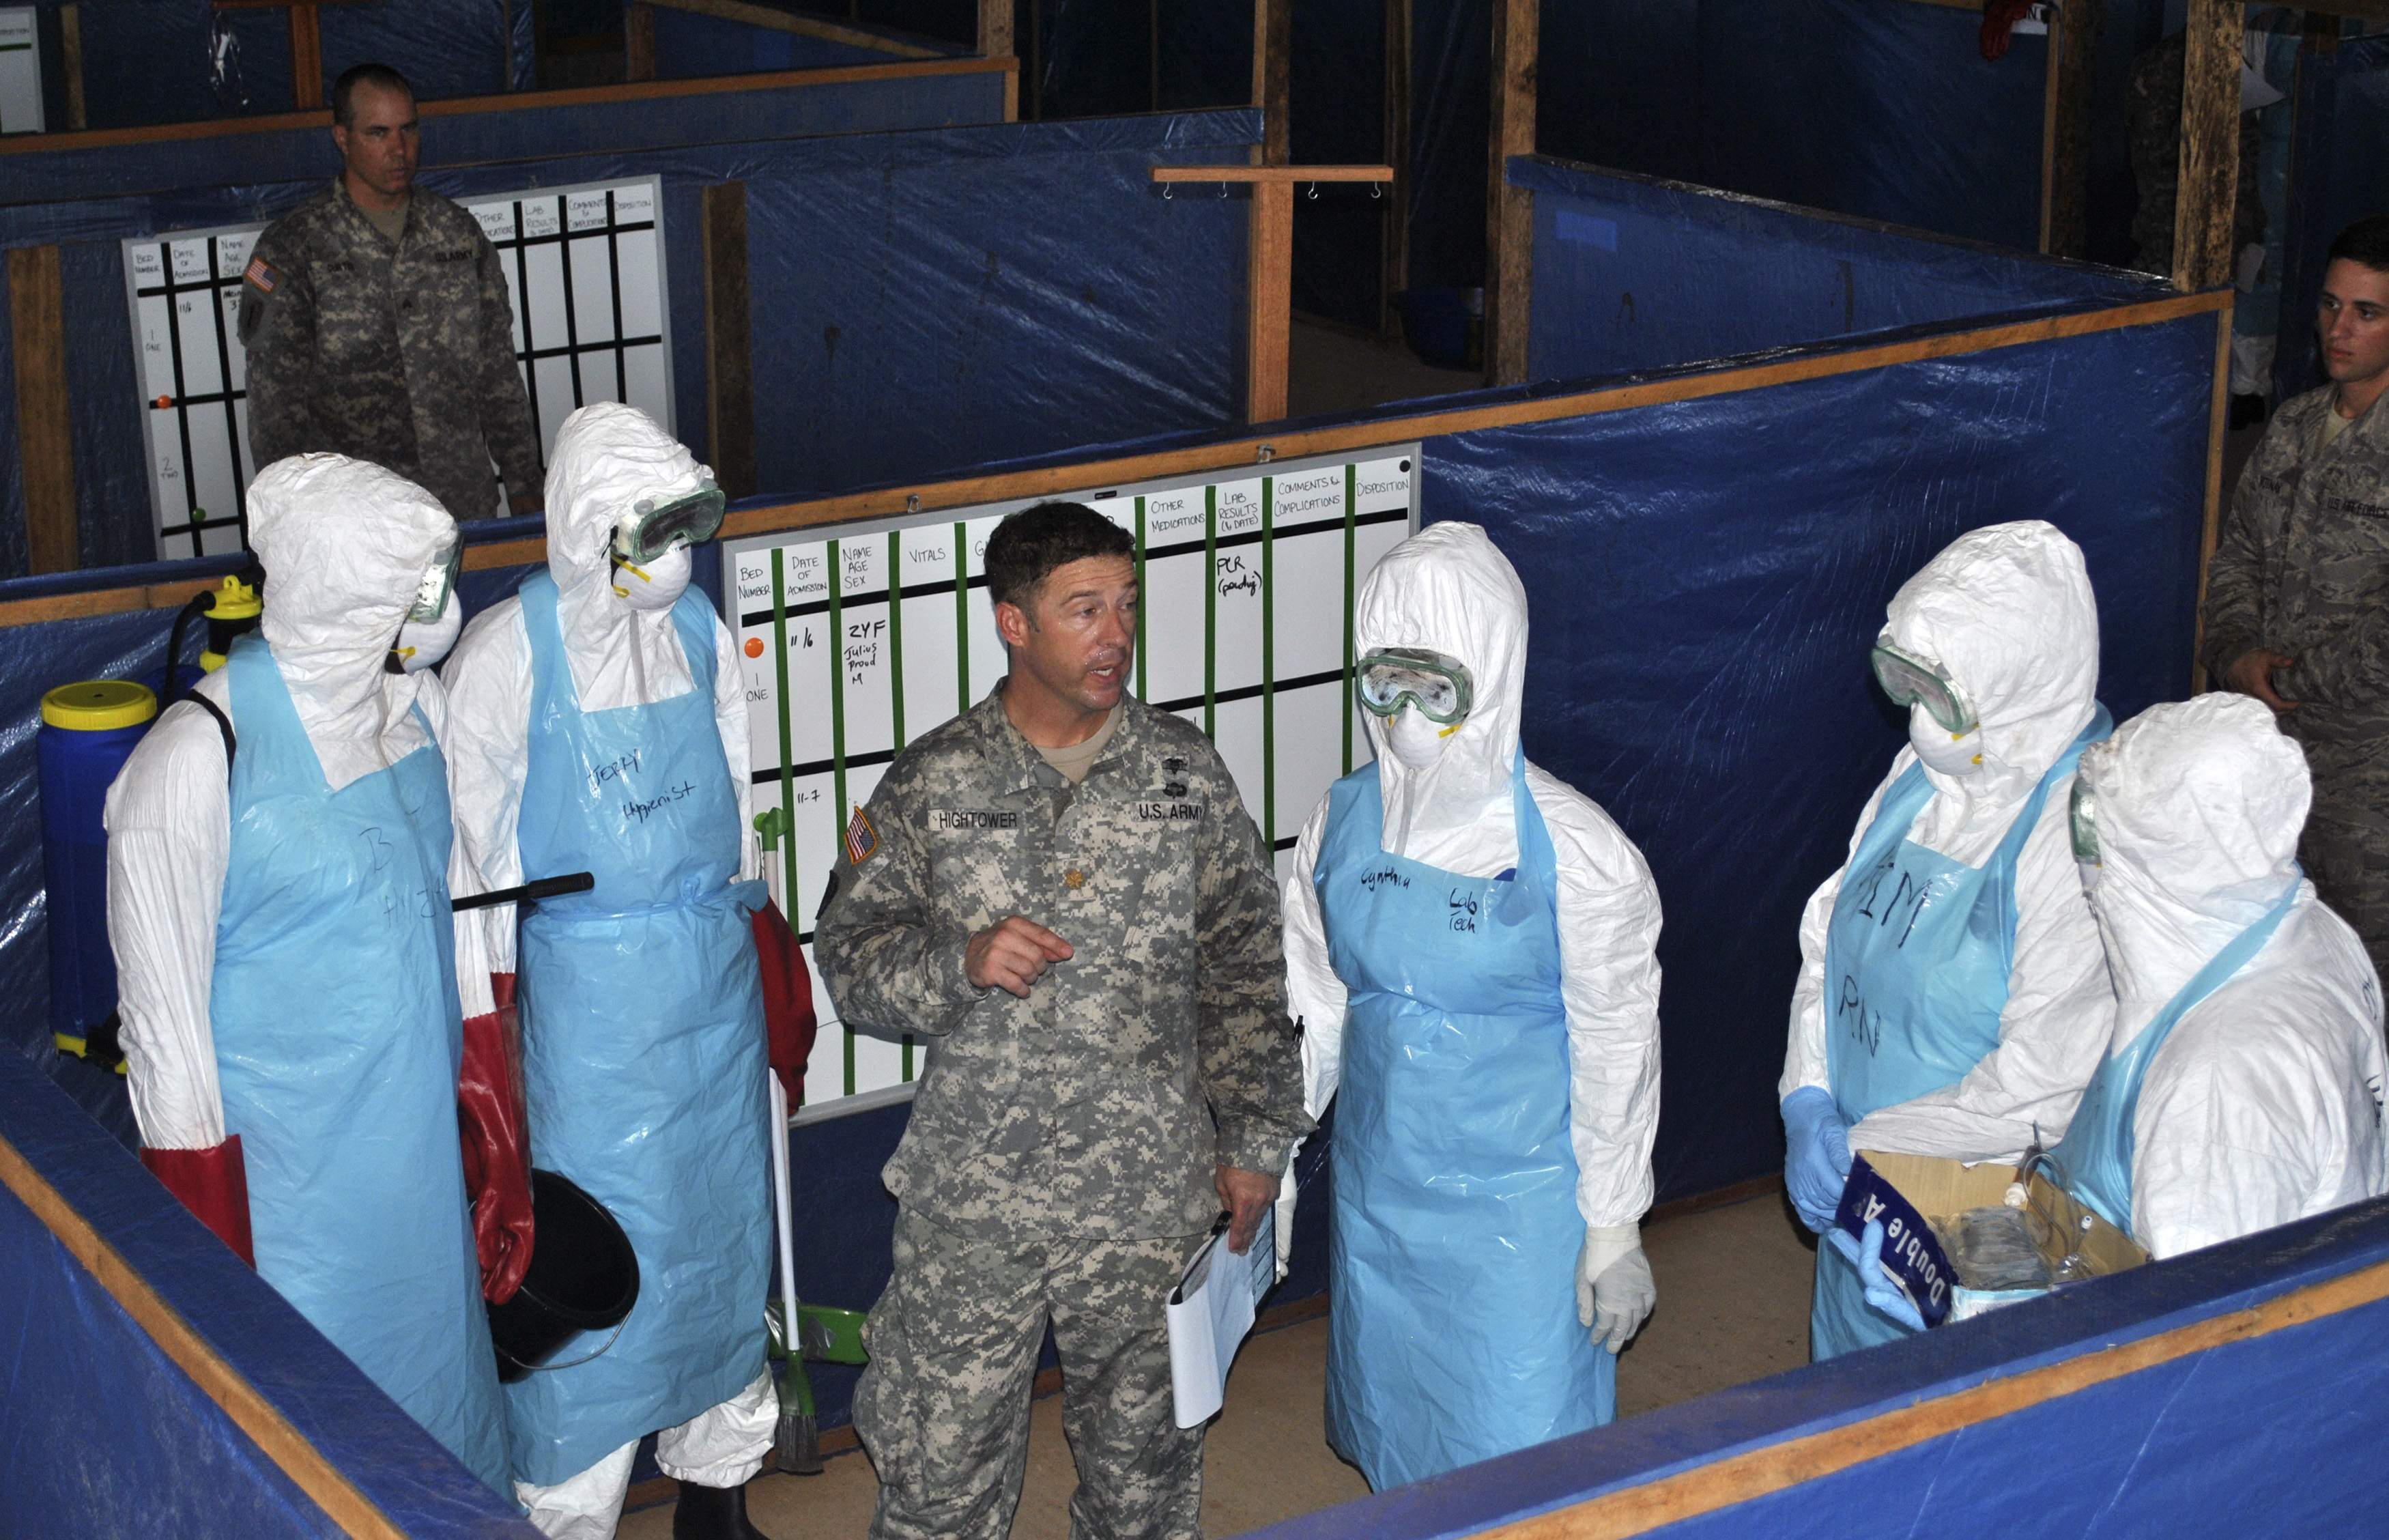 Scientist hopes to unlock Ebola's secrets at outbreak's source